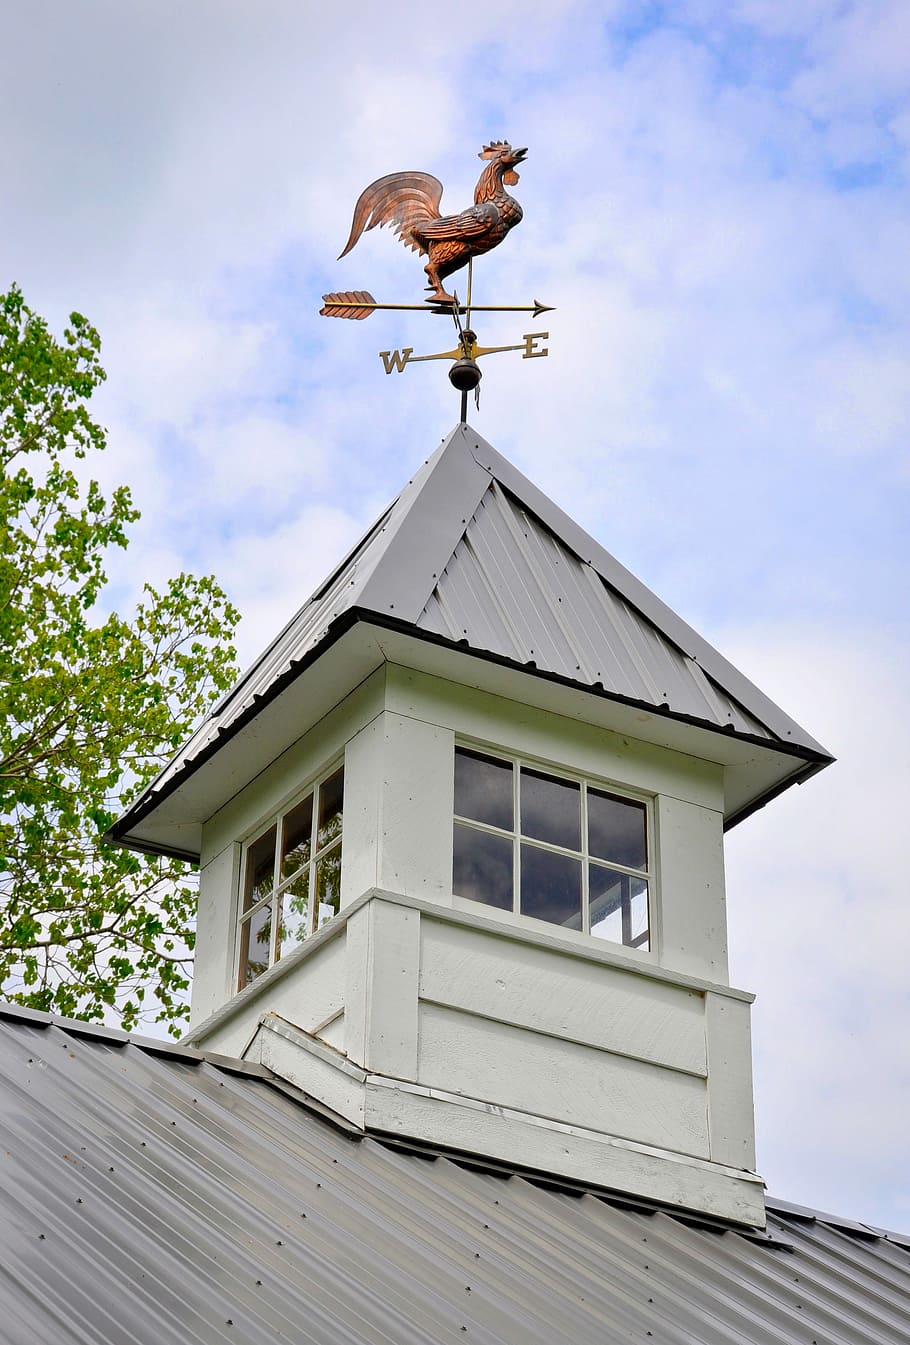 Weather Vane, Antique, Cupola, Farm, barn, rooster, cooper, compass, west, east south